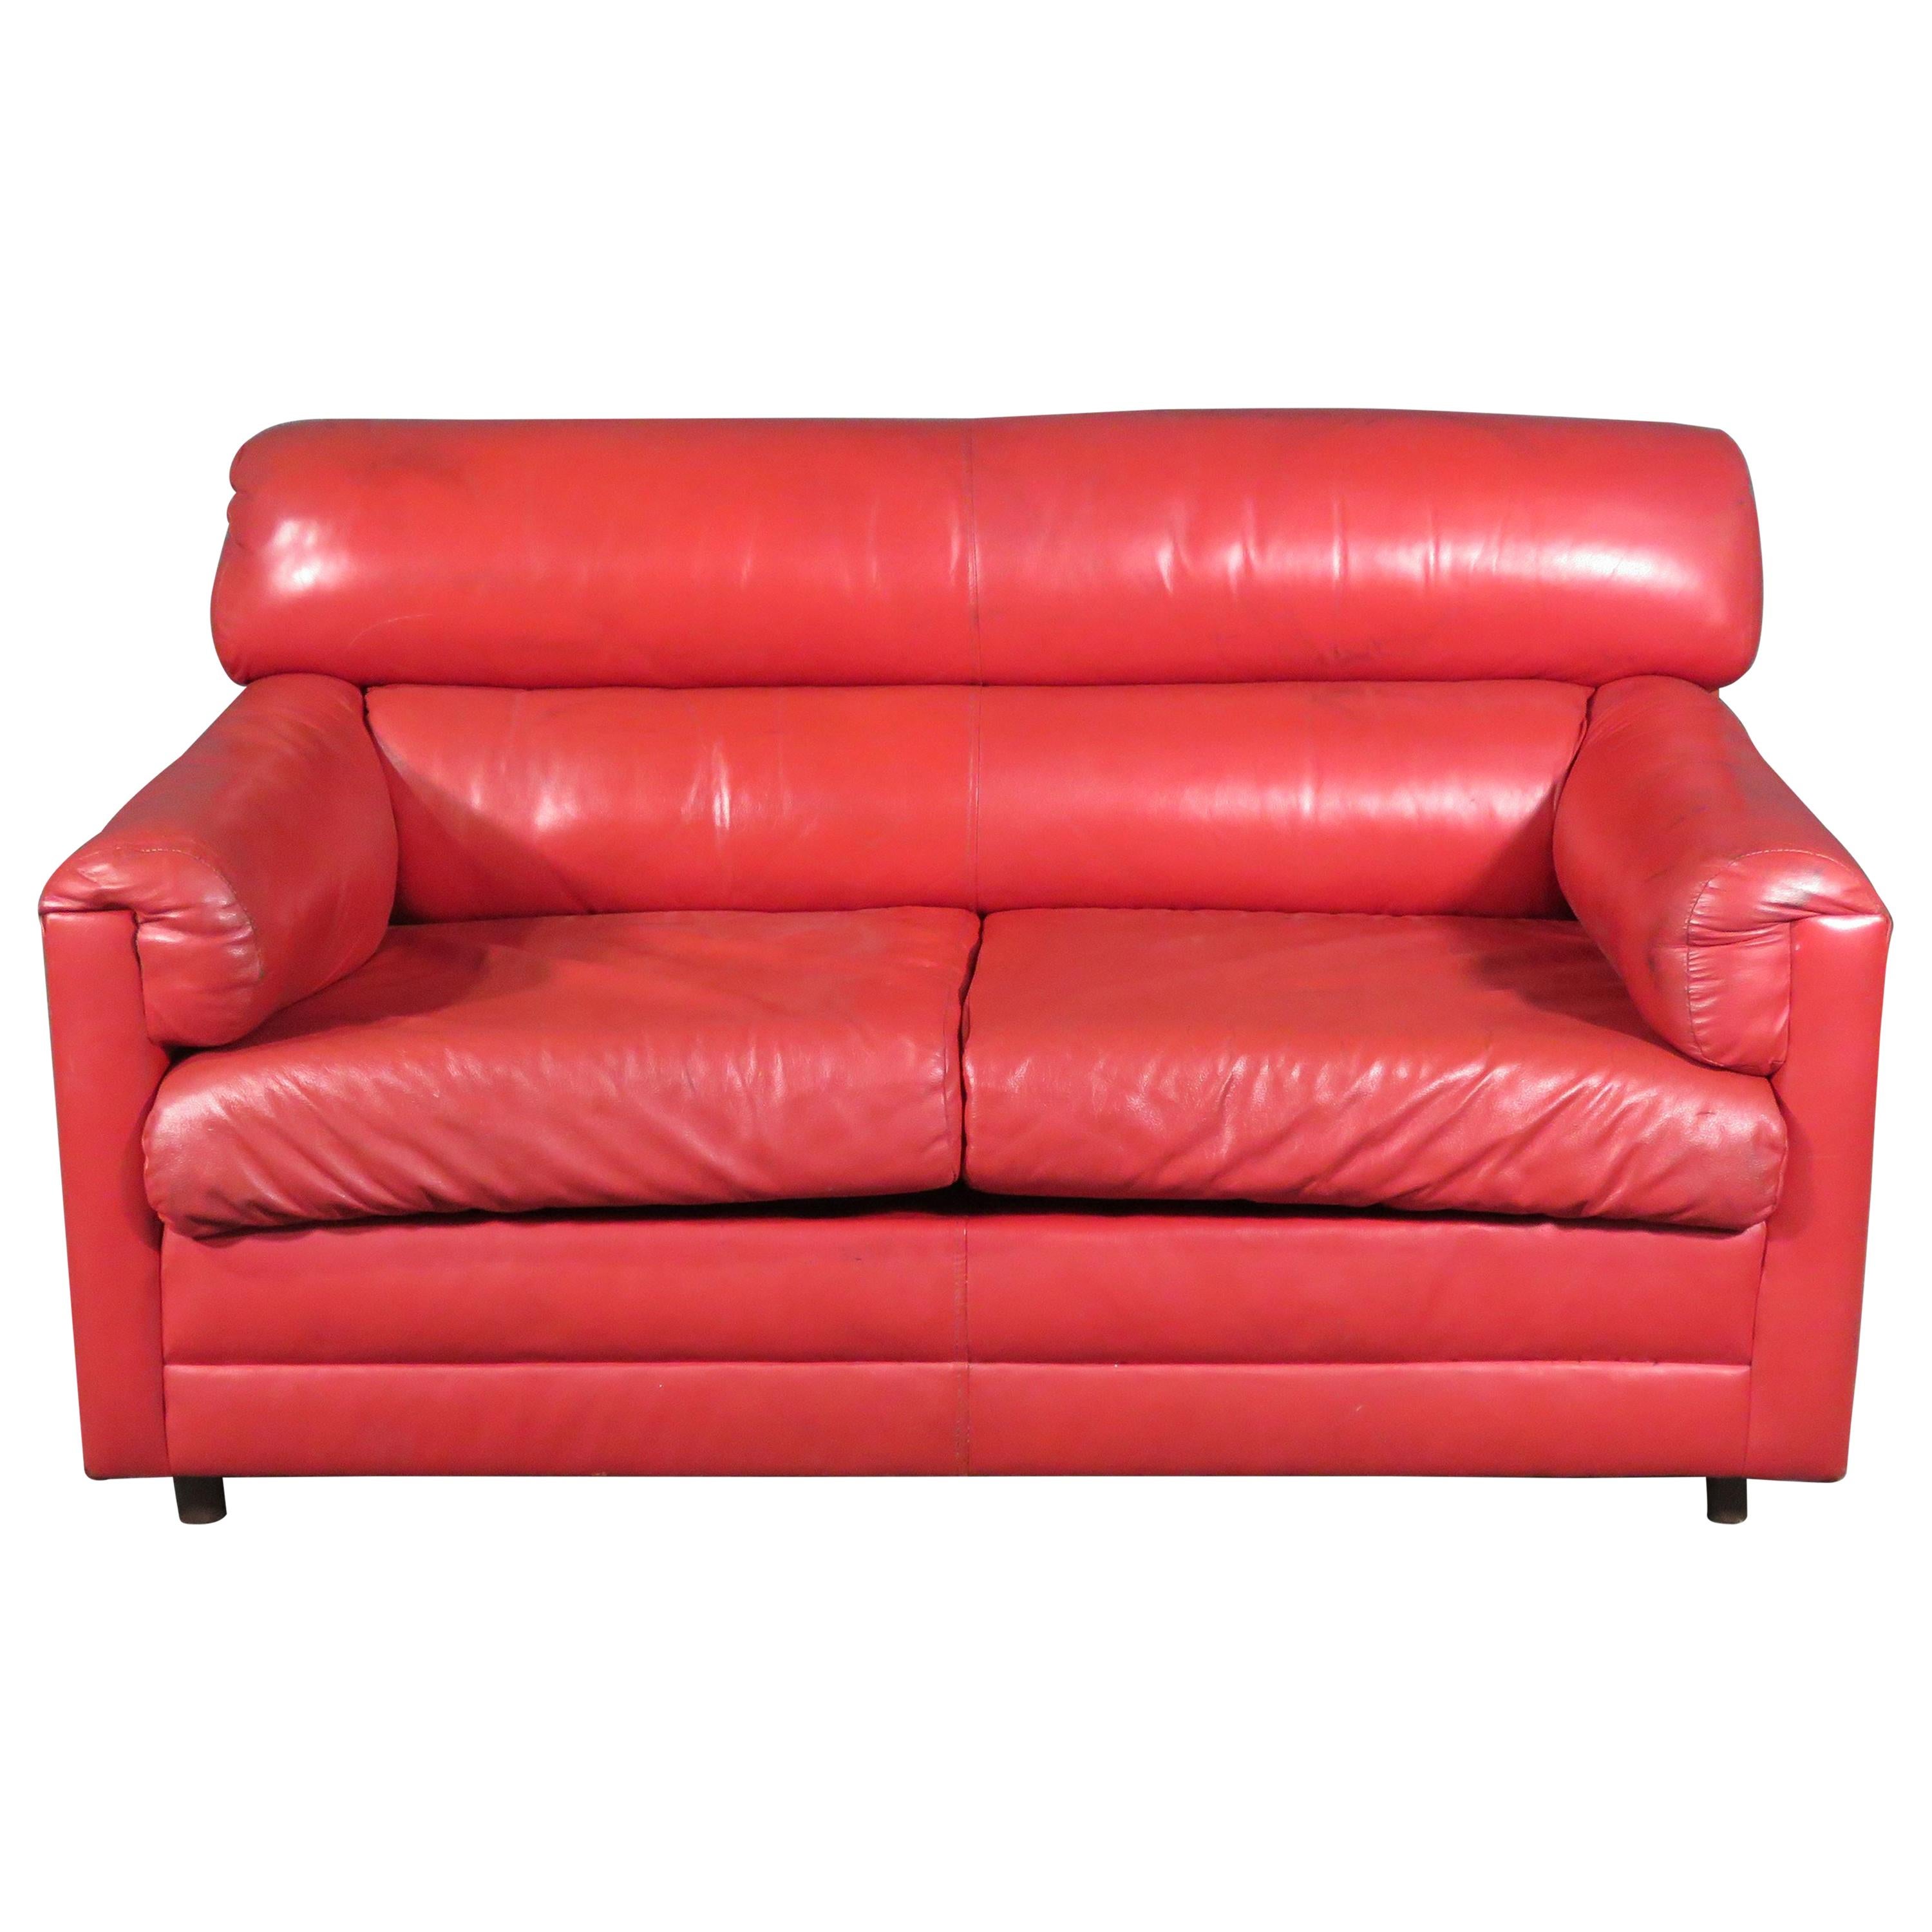 Vintage Red Leather Loveseat For Sale